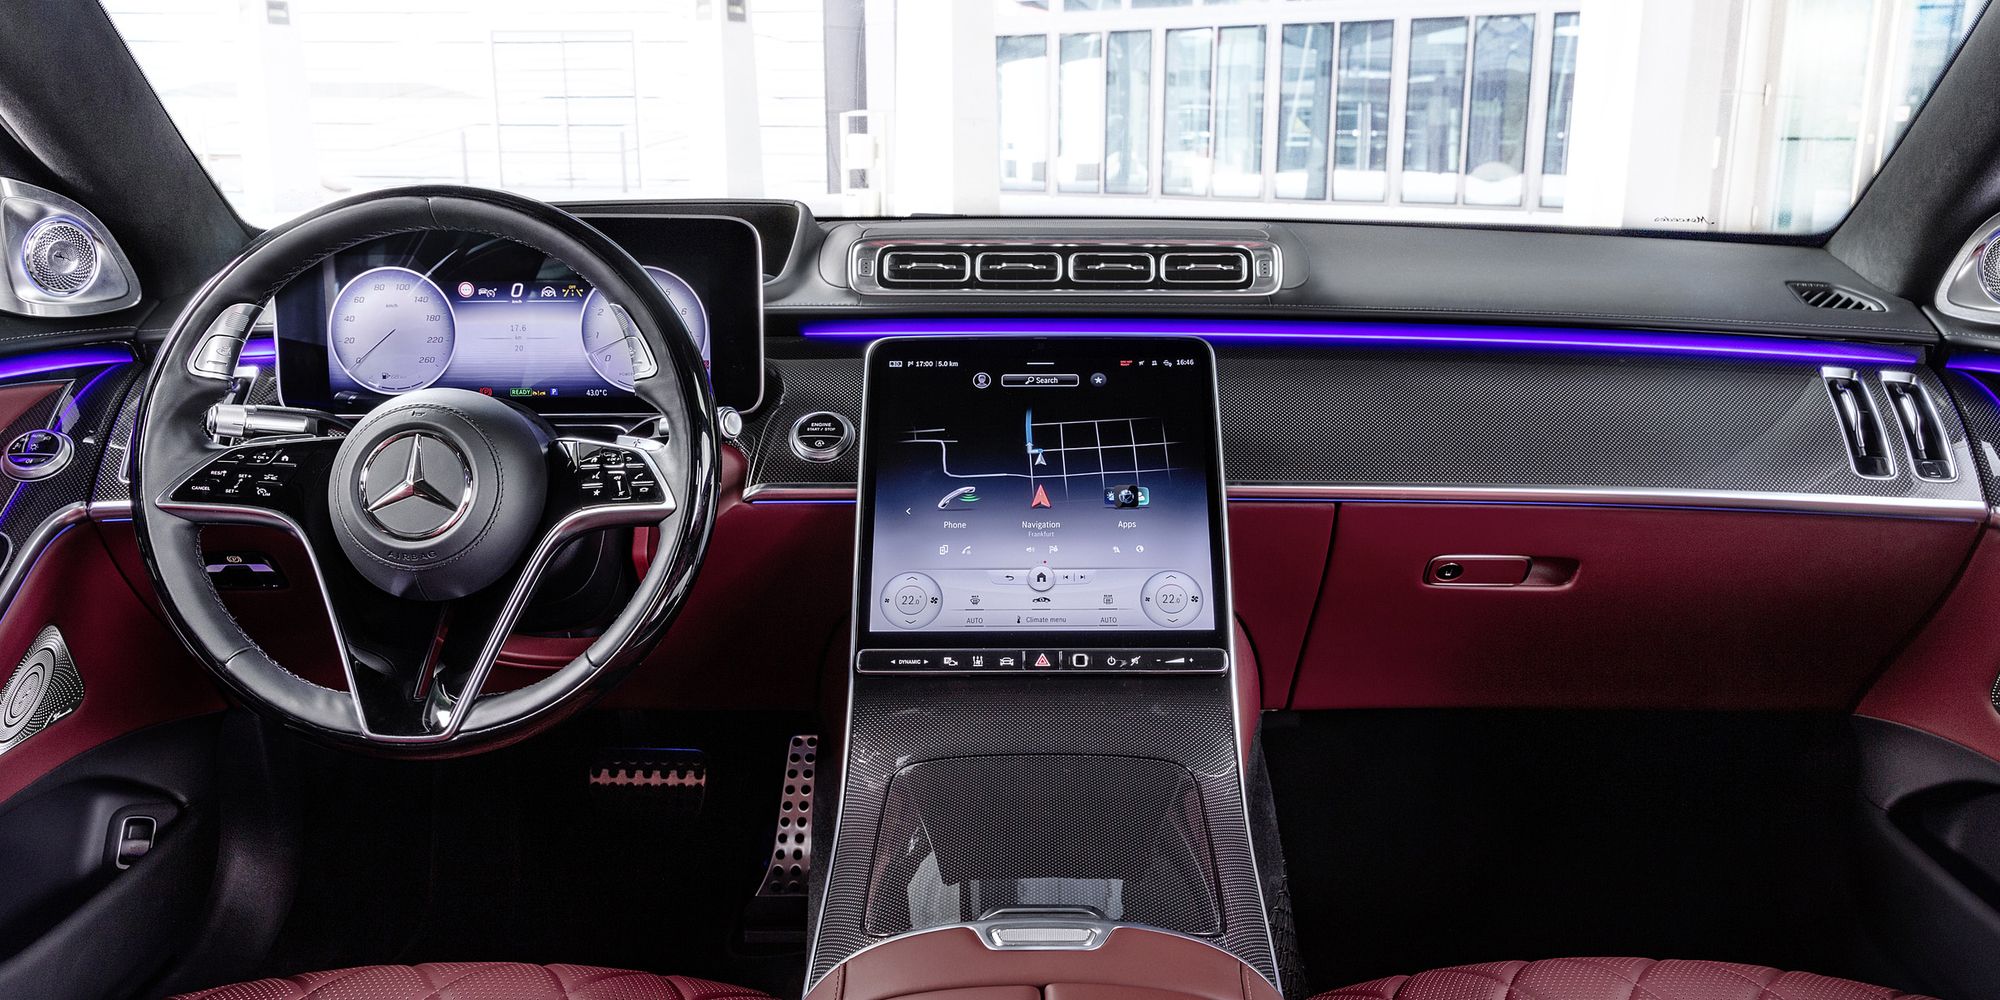 The interior of the new S-Class